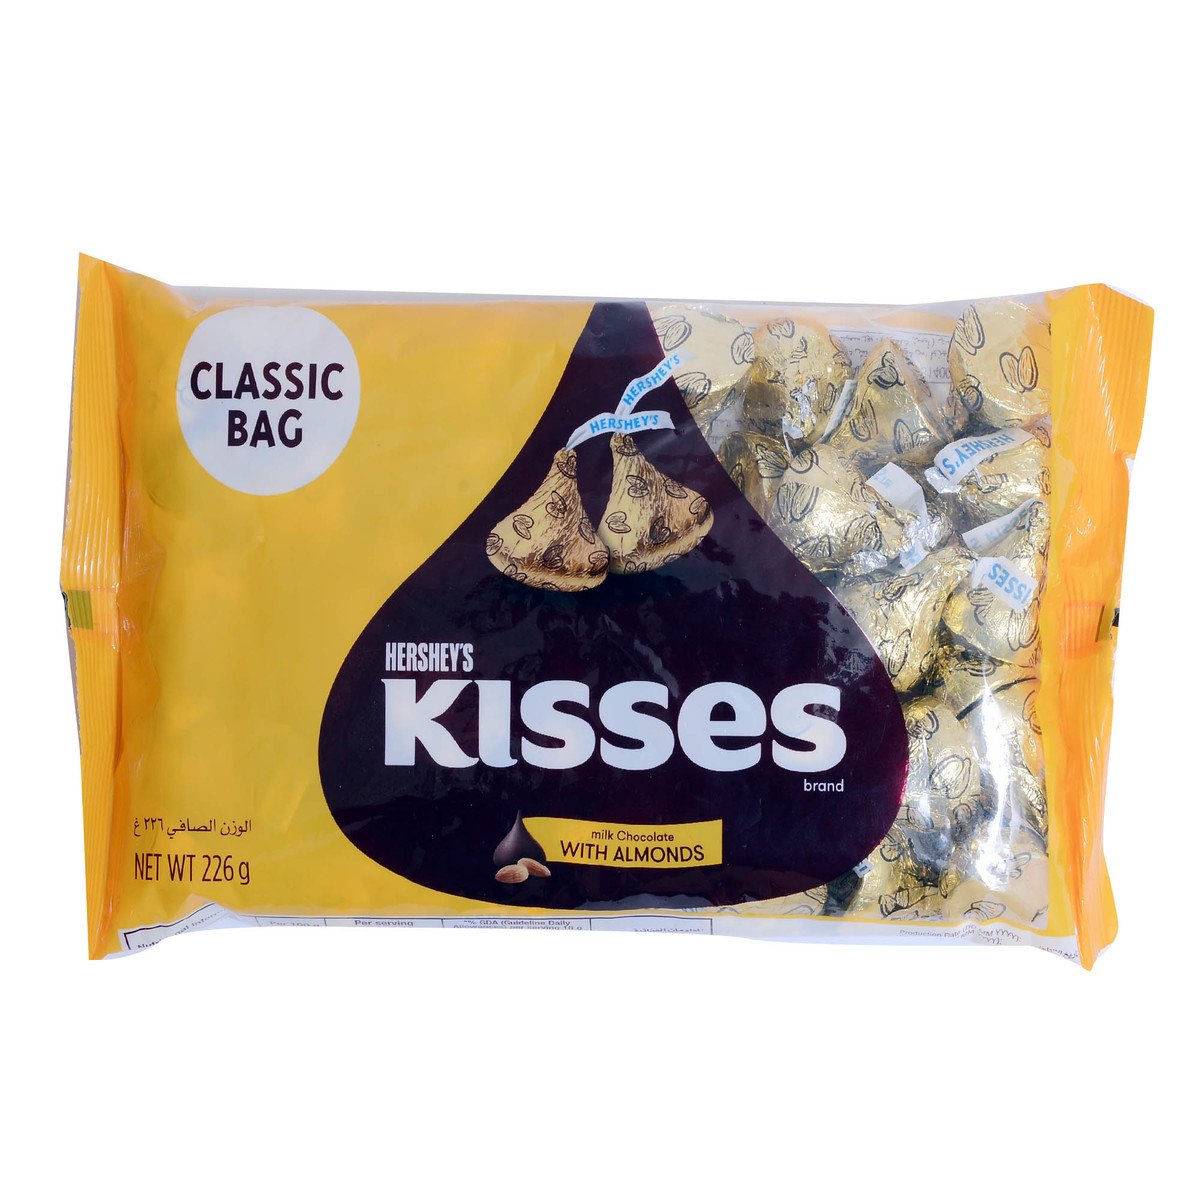 Hershey's Kisses Milk Chocolate with Almond 226g